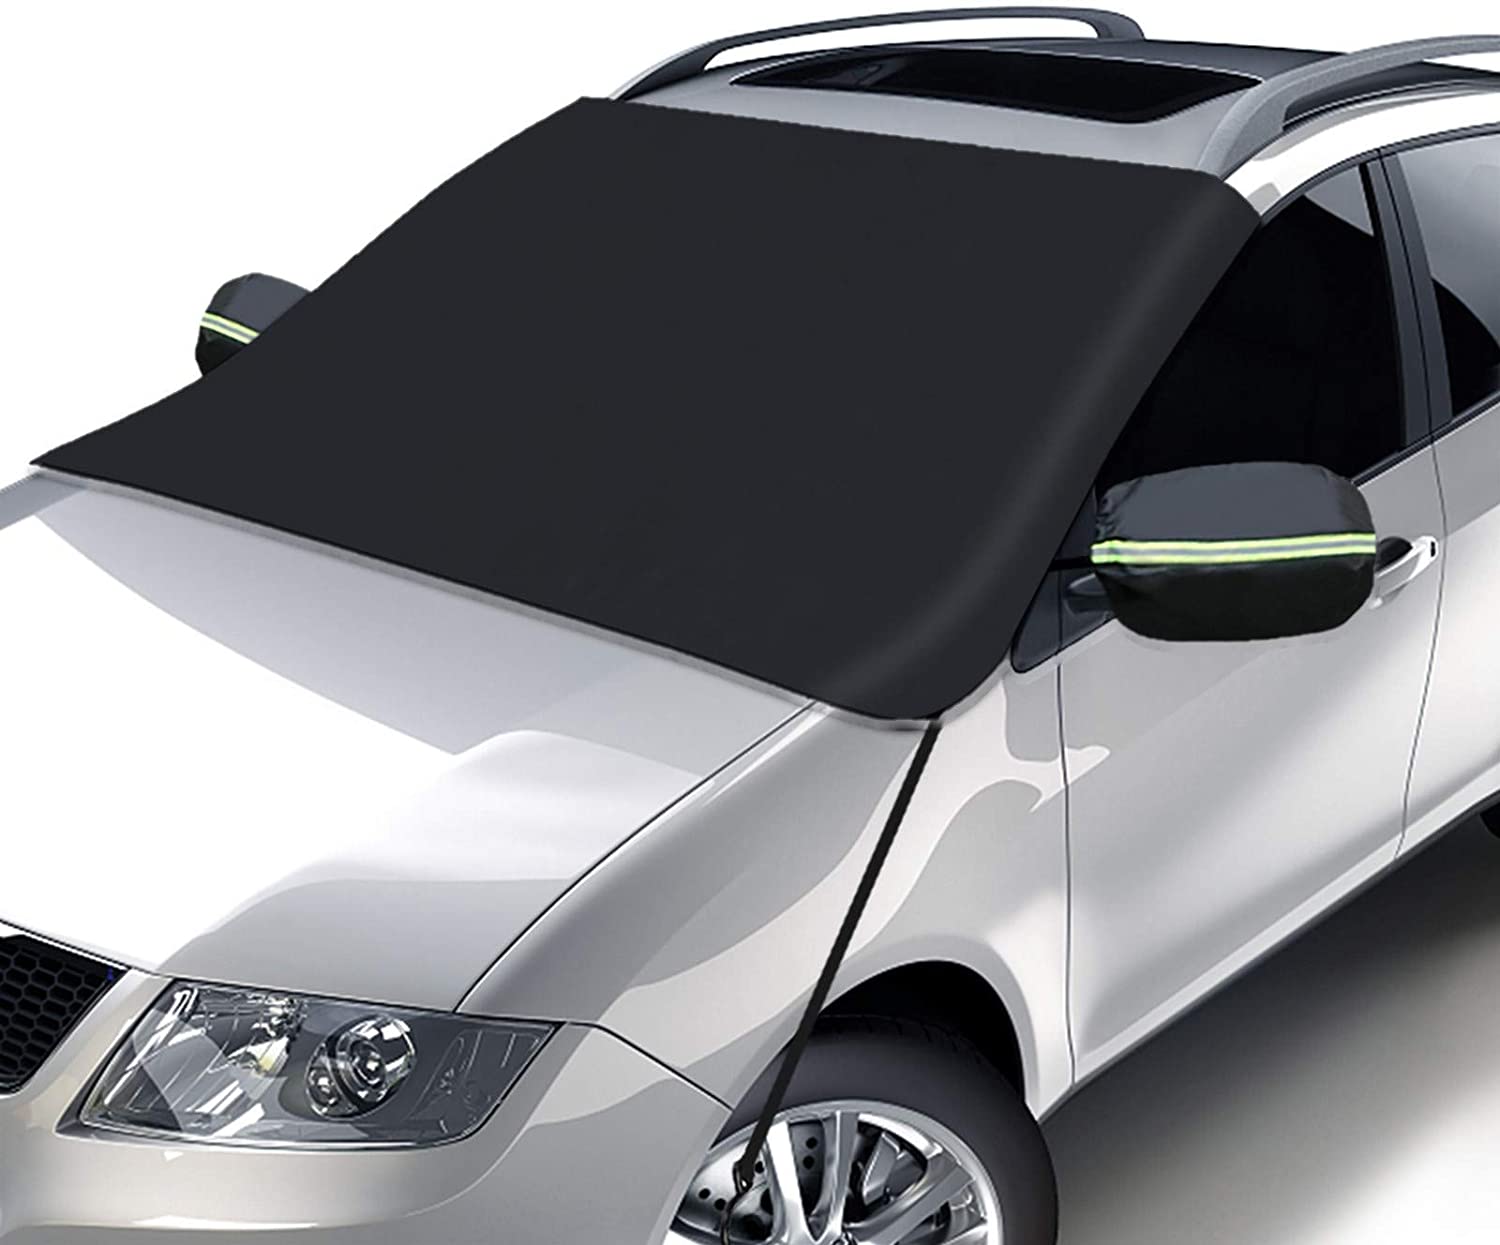 How To Choose The Best Exterior Windshield Cover - Glass.com